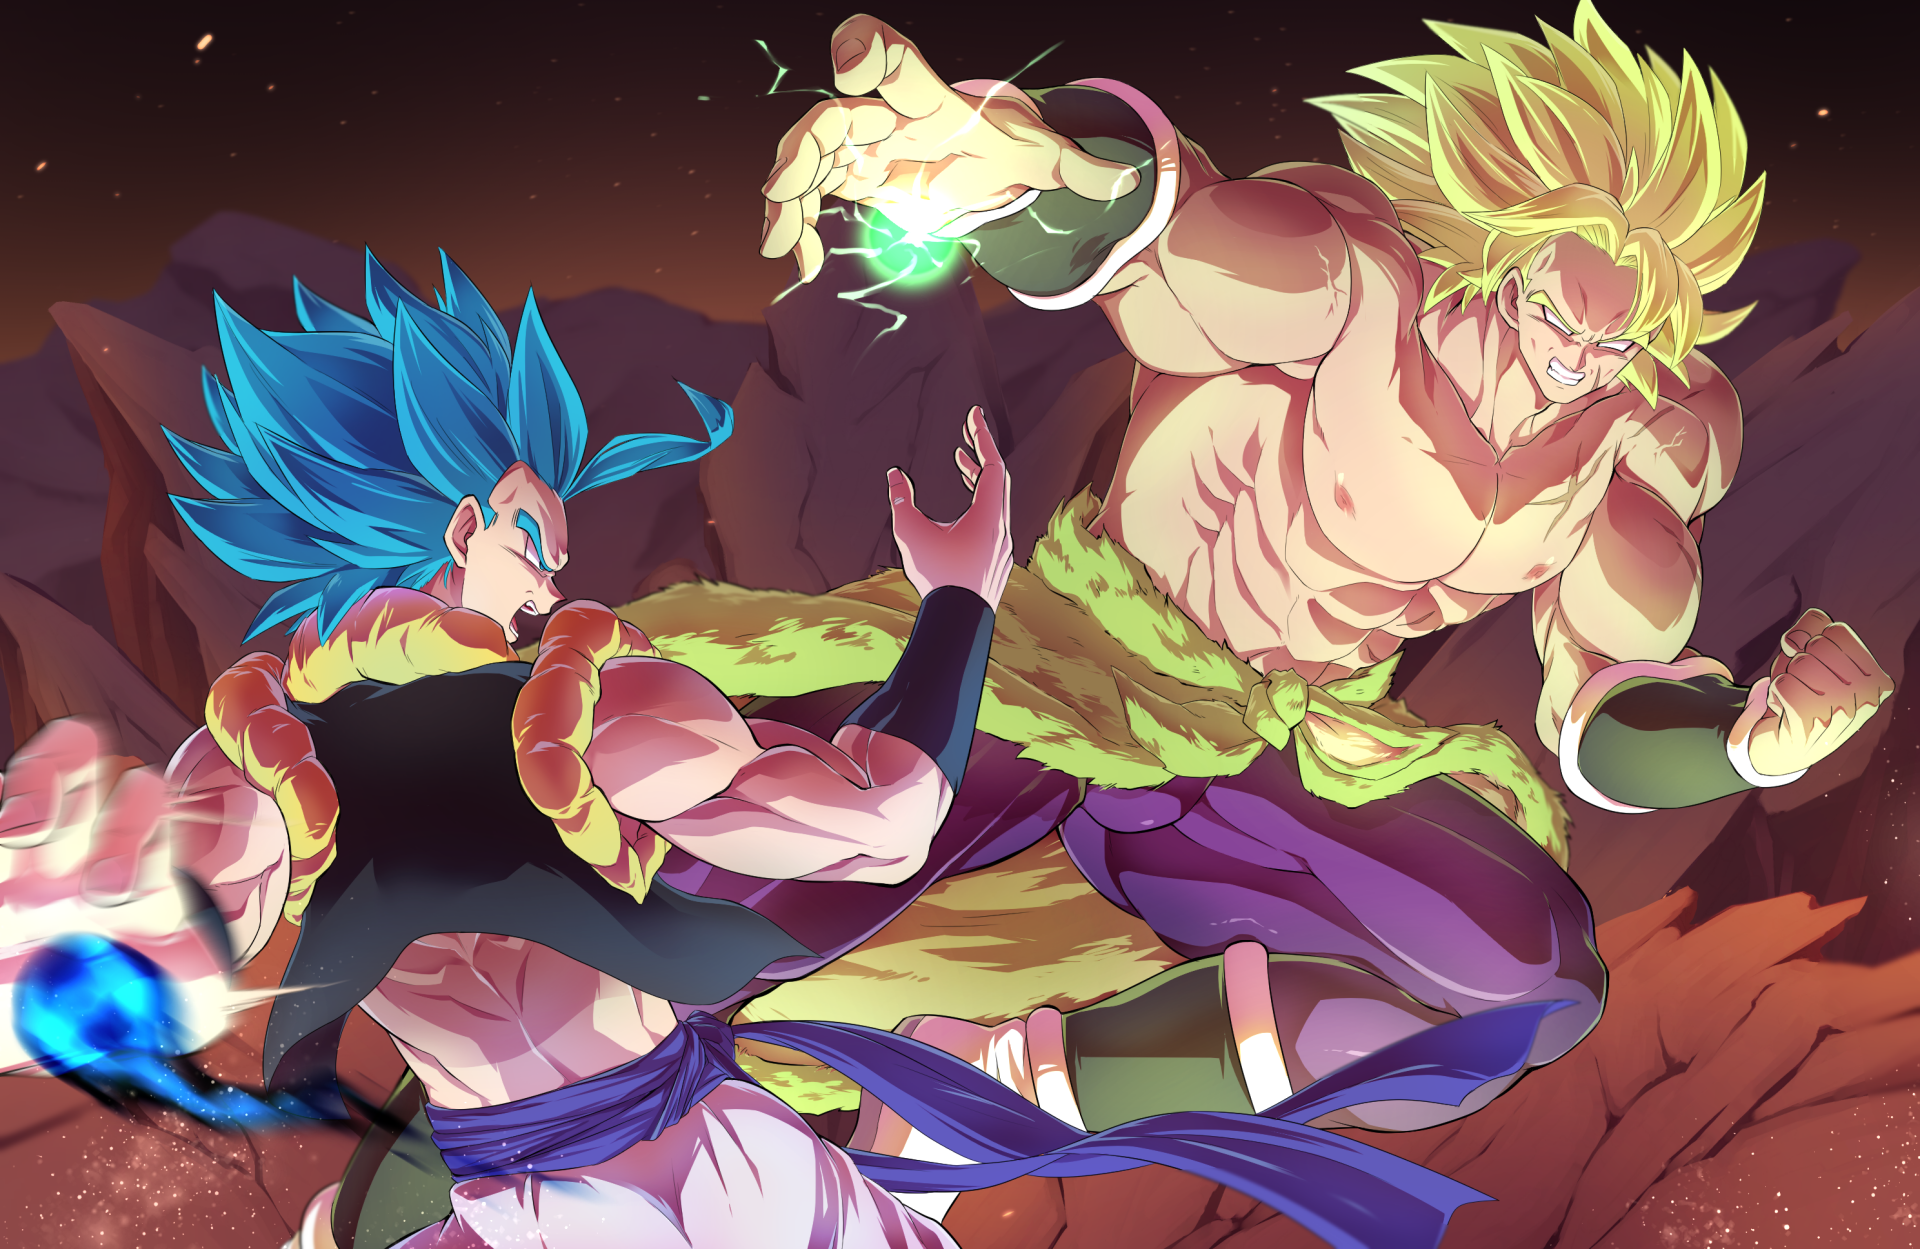 2976x1936 Gogeta Vs Broly by もぐろ Wallpaper Background Image. 